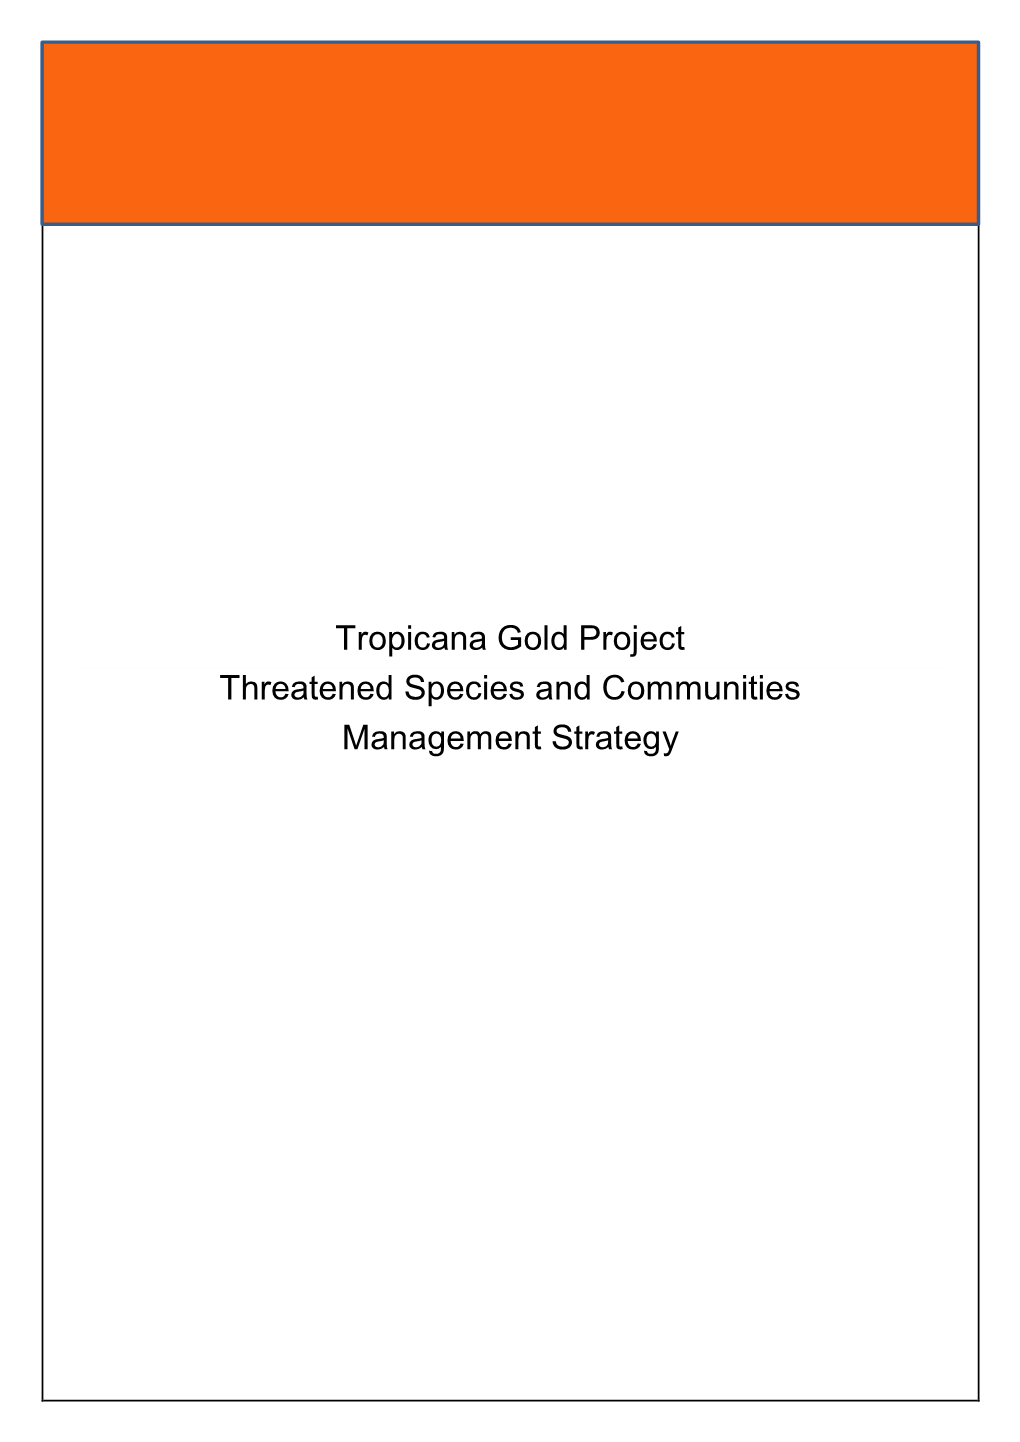 E. Threatened Species and Communities Management Strategy